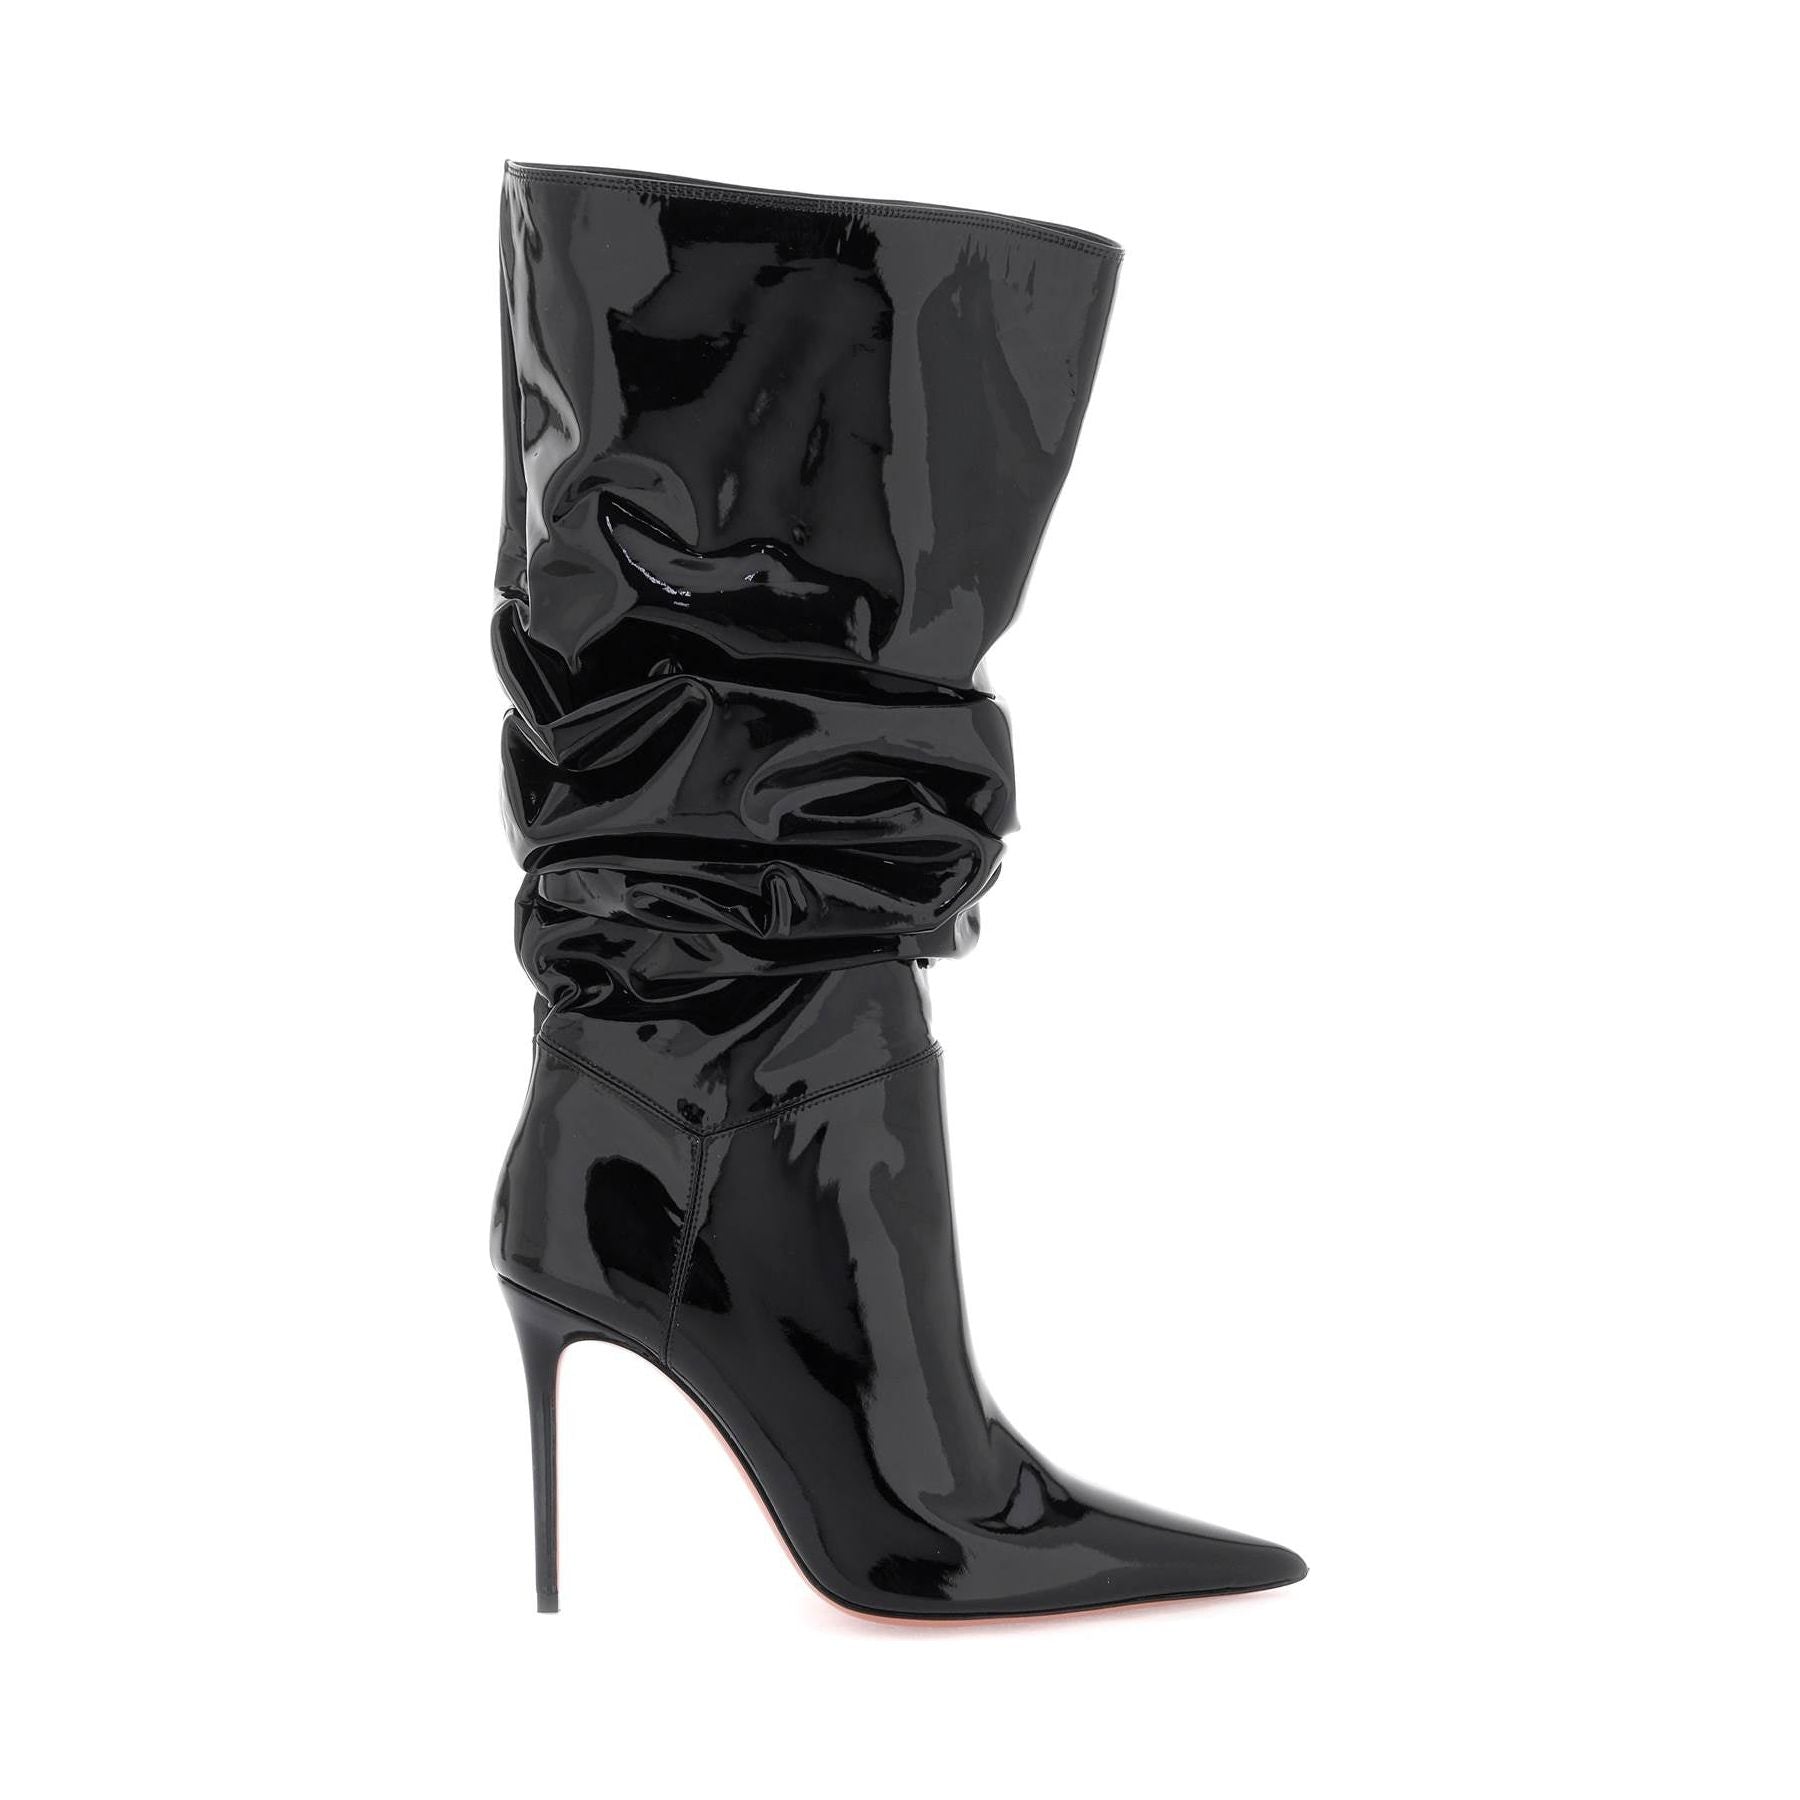 Patent Leather Jahleel Cuissardes Boots with Gathered Details